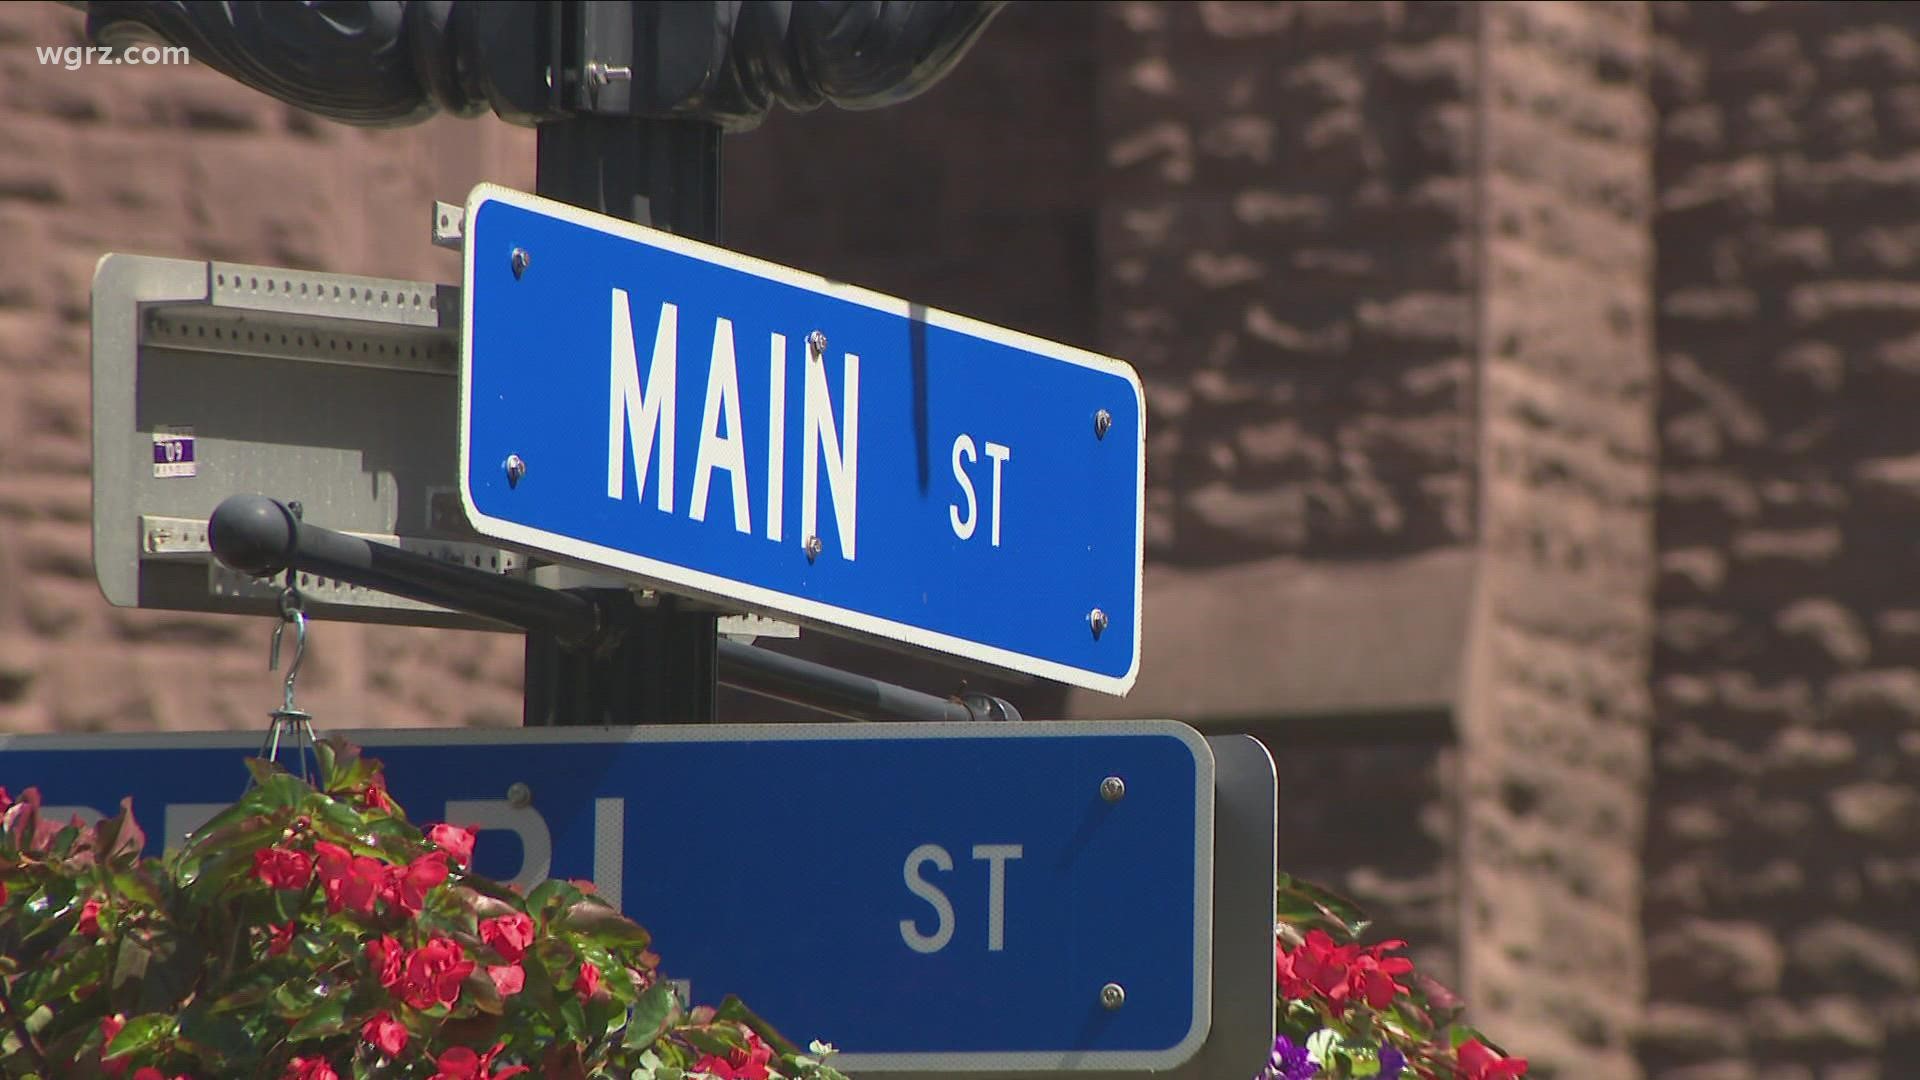 Senator Chuck Schumer was in Buffalo today to announce that he's applying for a $25-million federal grant  to transform part of Main Street in Buffalo.